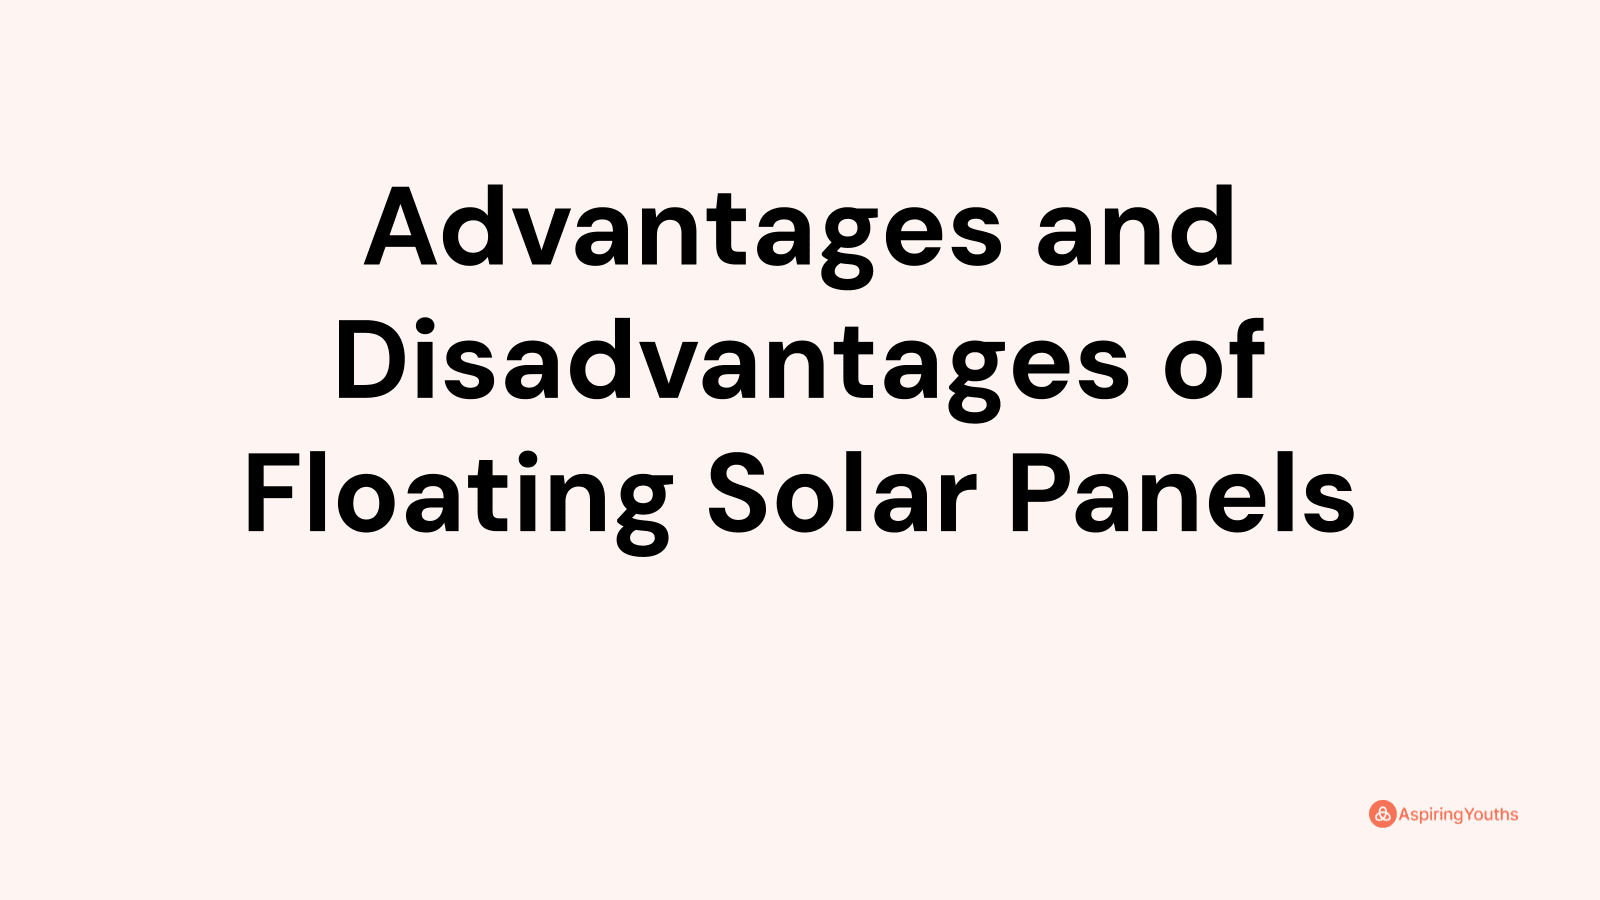 Advantages and disadvantages of Floating Solar Panels